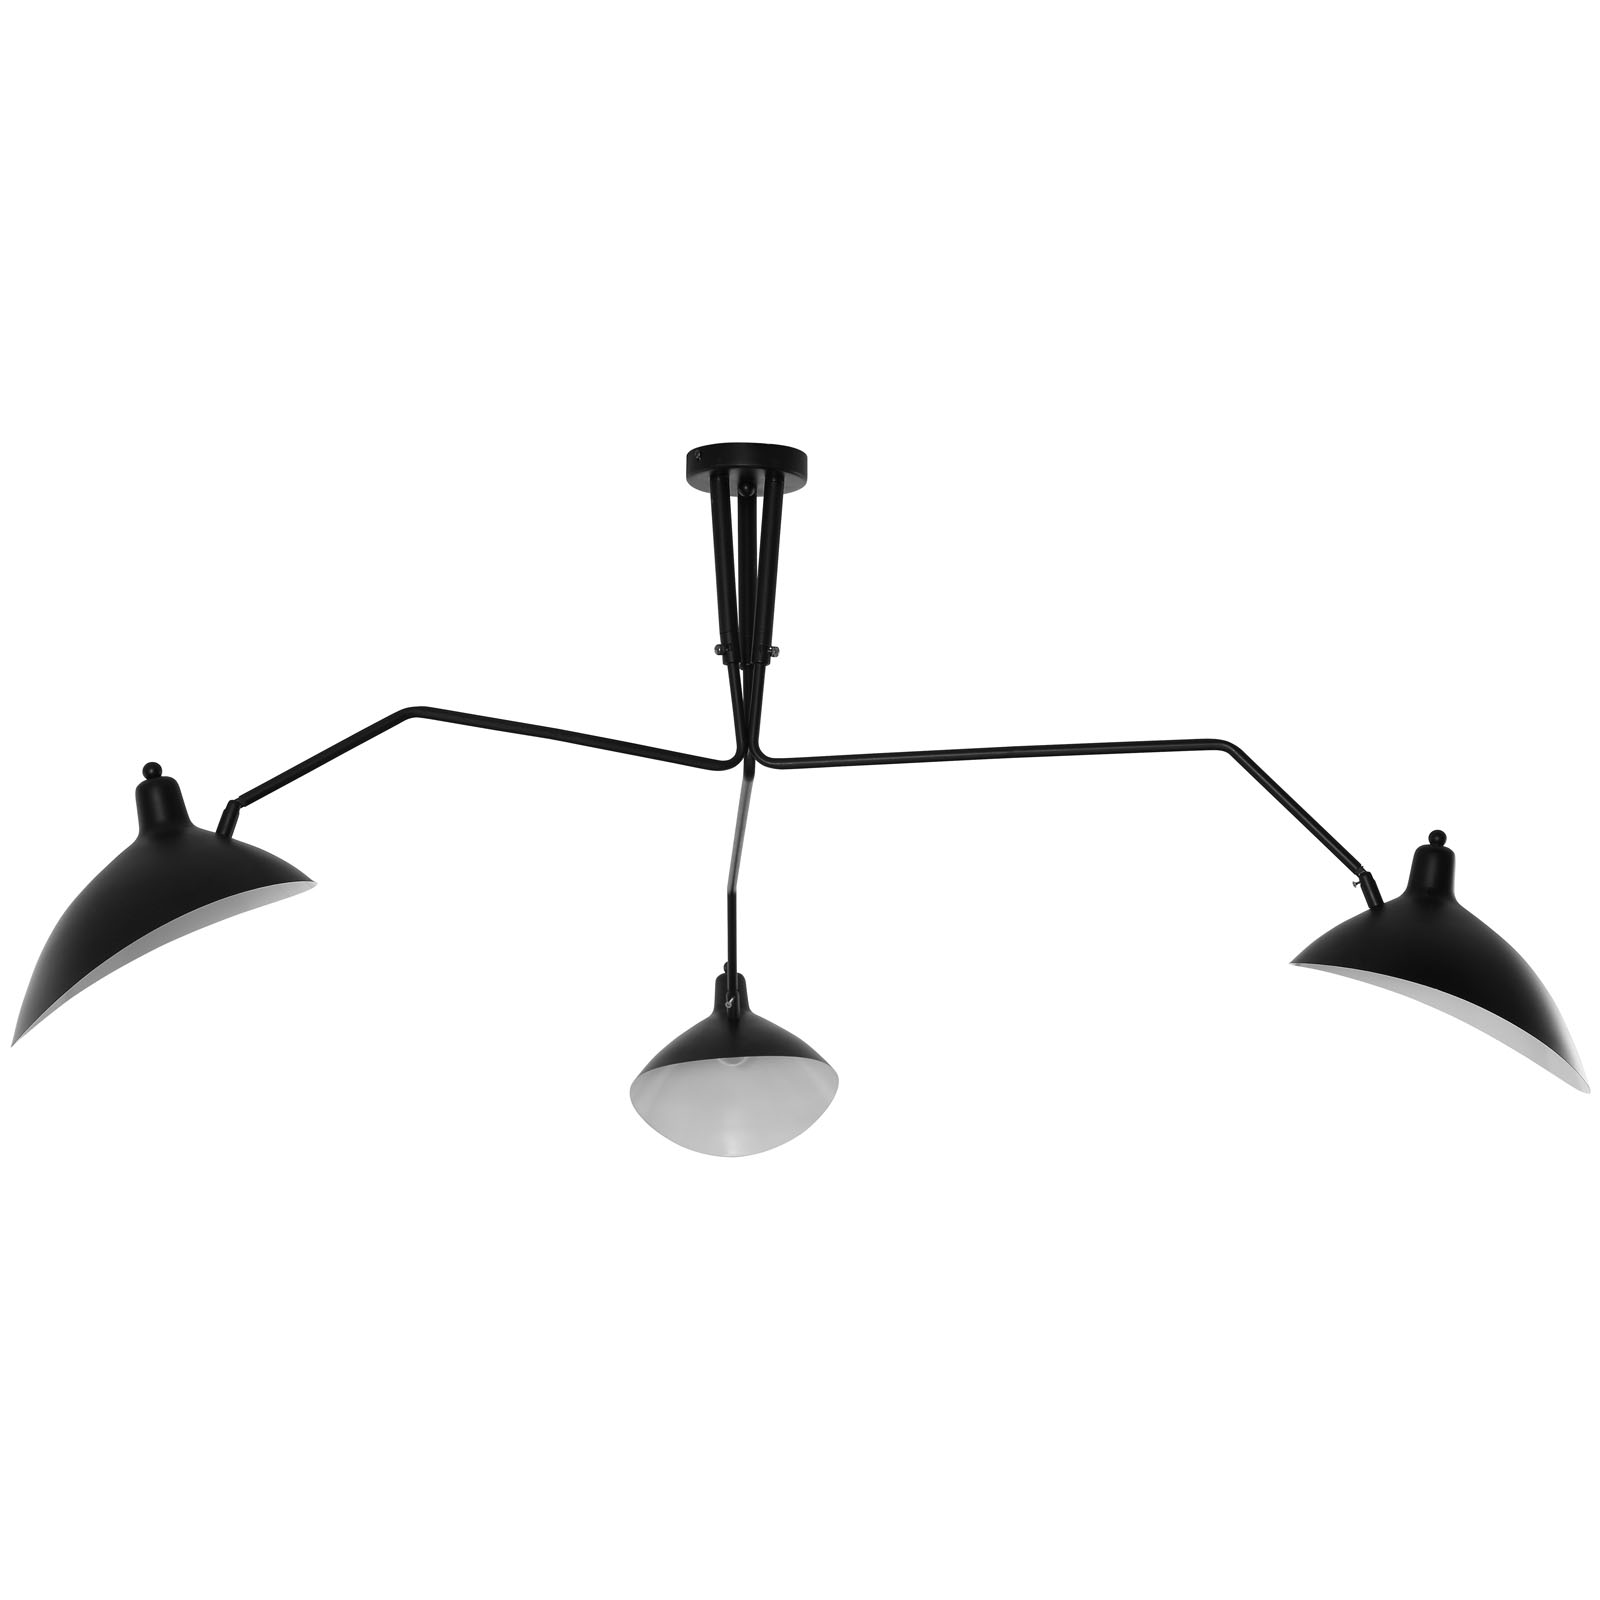 EASTEND IMPORTS Black View Ceiling Fixture